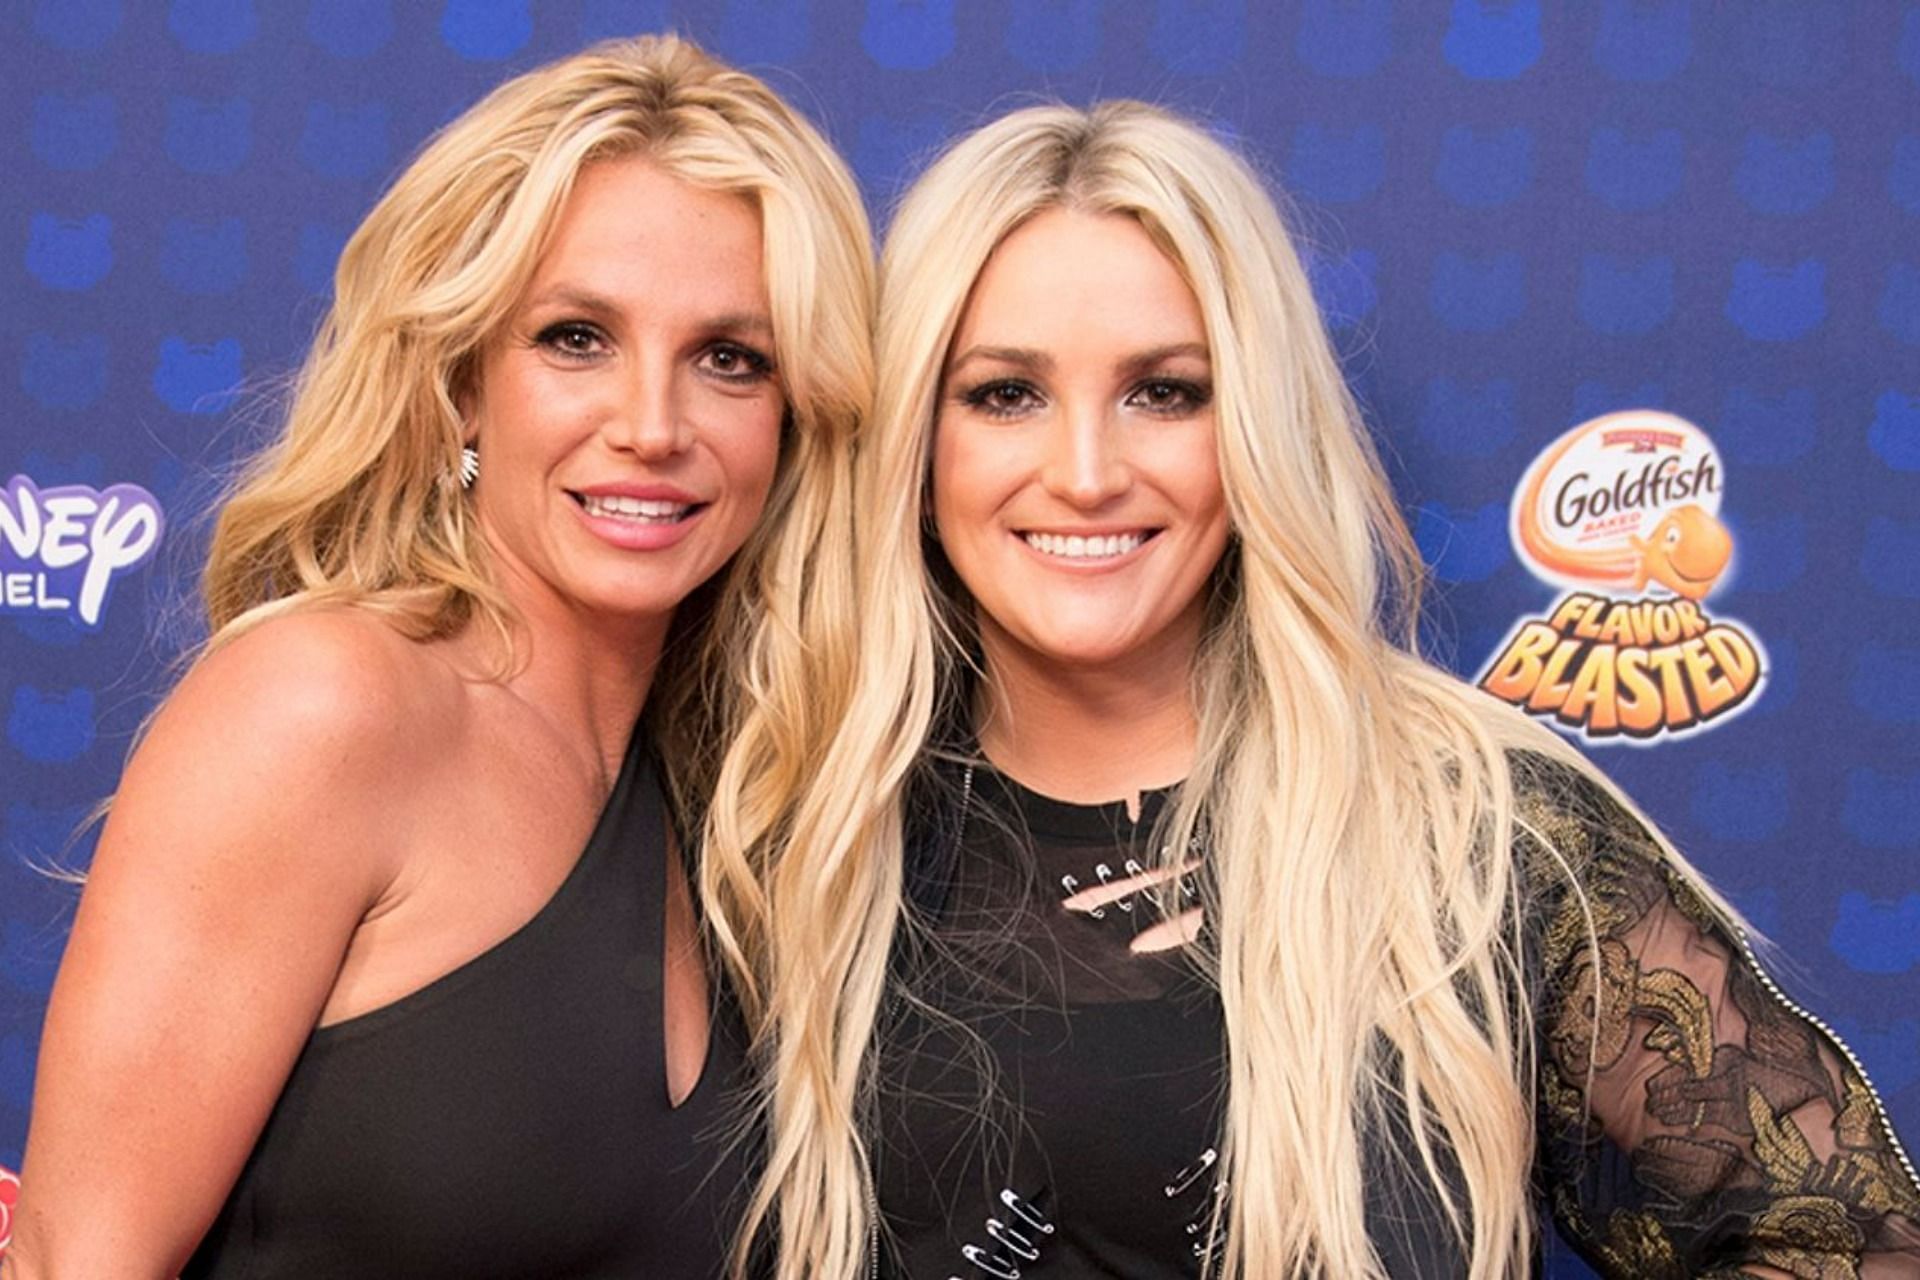 Jamie Lynn Spears and Britney Spears (Image via Getty Images/Walt Disney Television)